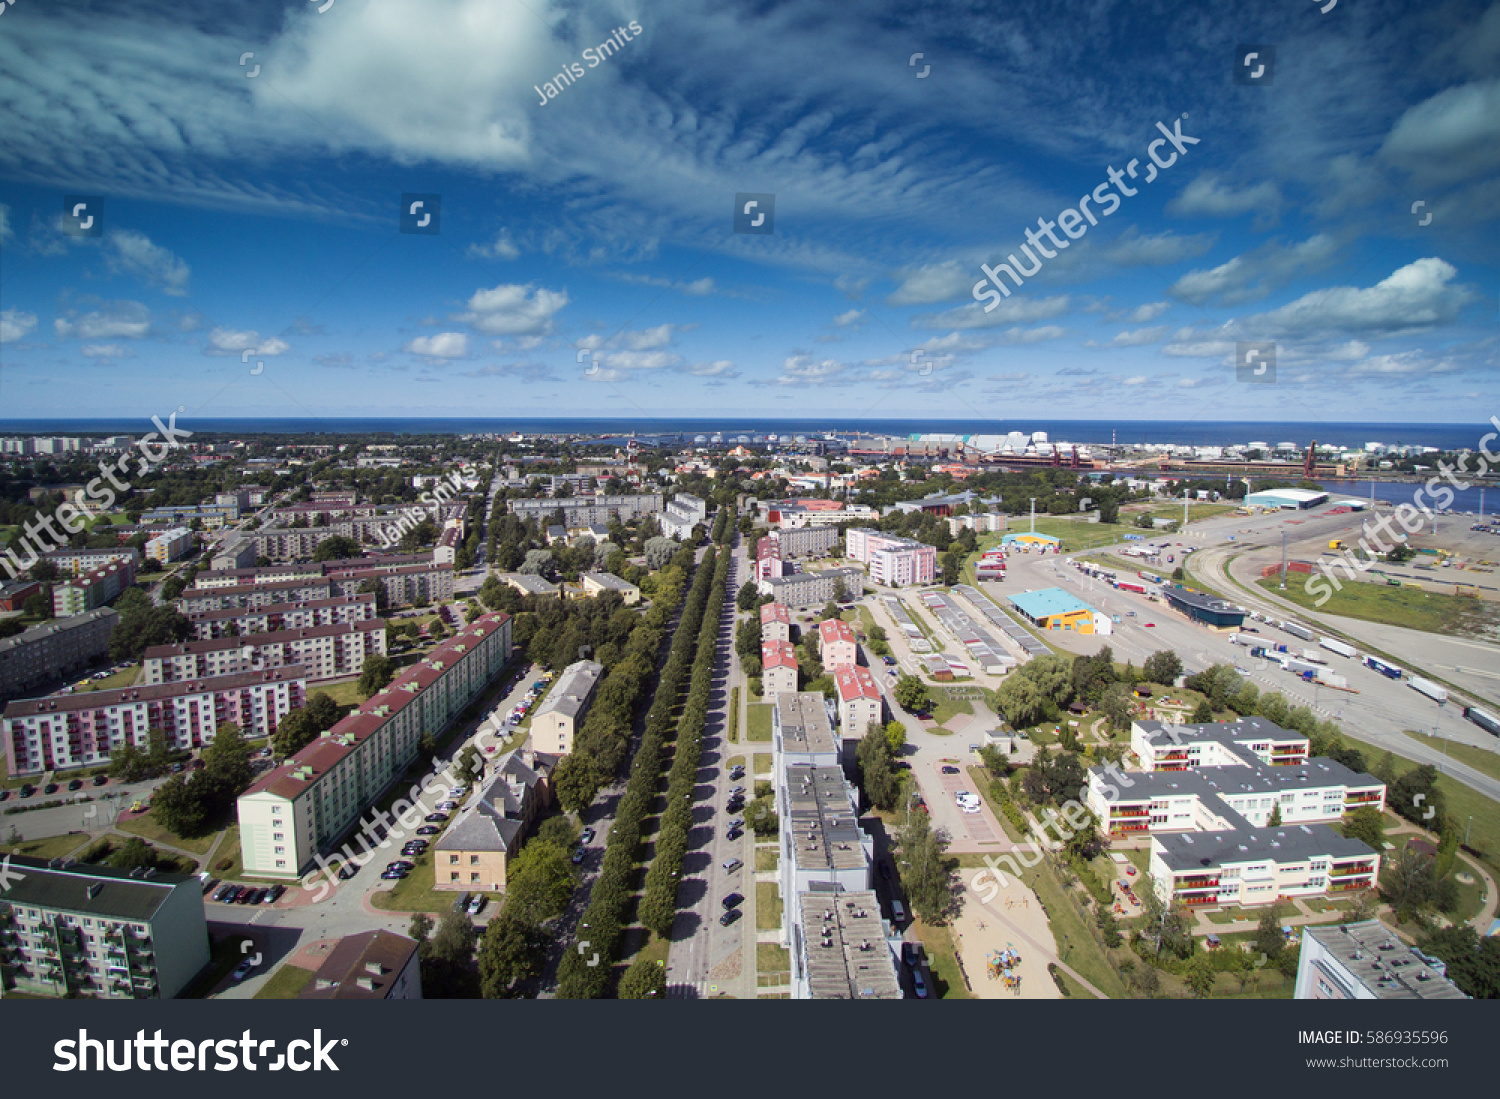 Aerial view of Ventspils city, Latvia. #586935596